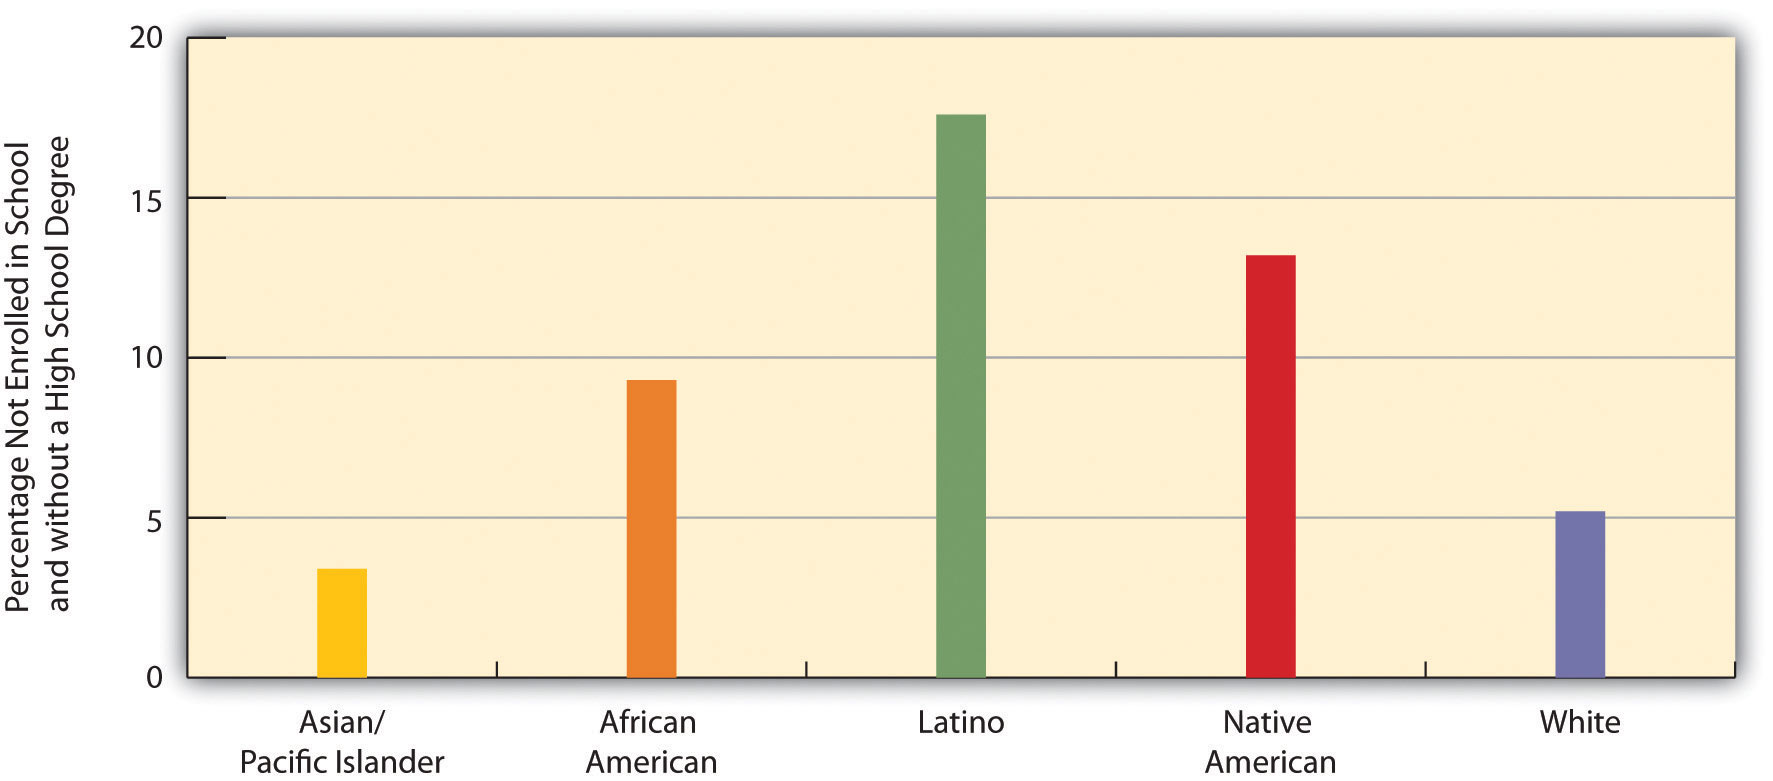 Race, Ethnicity, and High School Dropout Rate, Persons Ages 16-24, 2009 (Percentage Not Enrolled in School and without a High School Degree). The races most represented in this graph are Latino, Native American, and African American